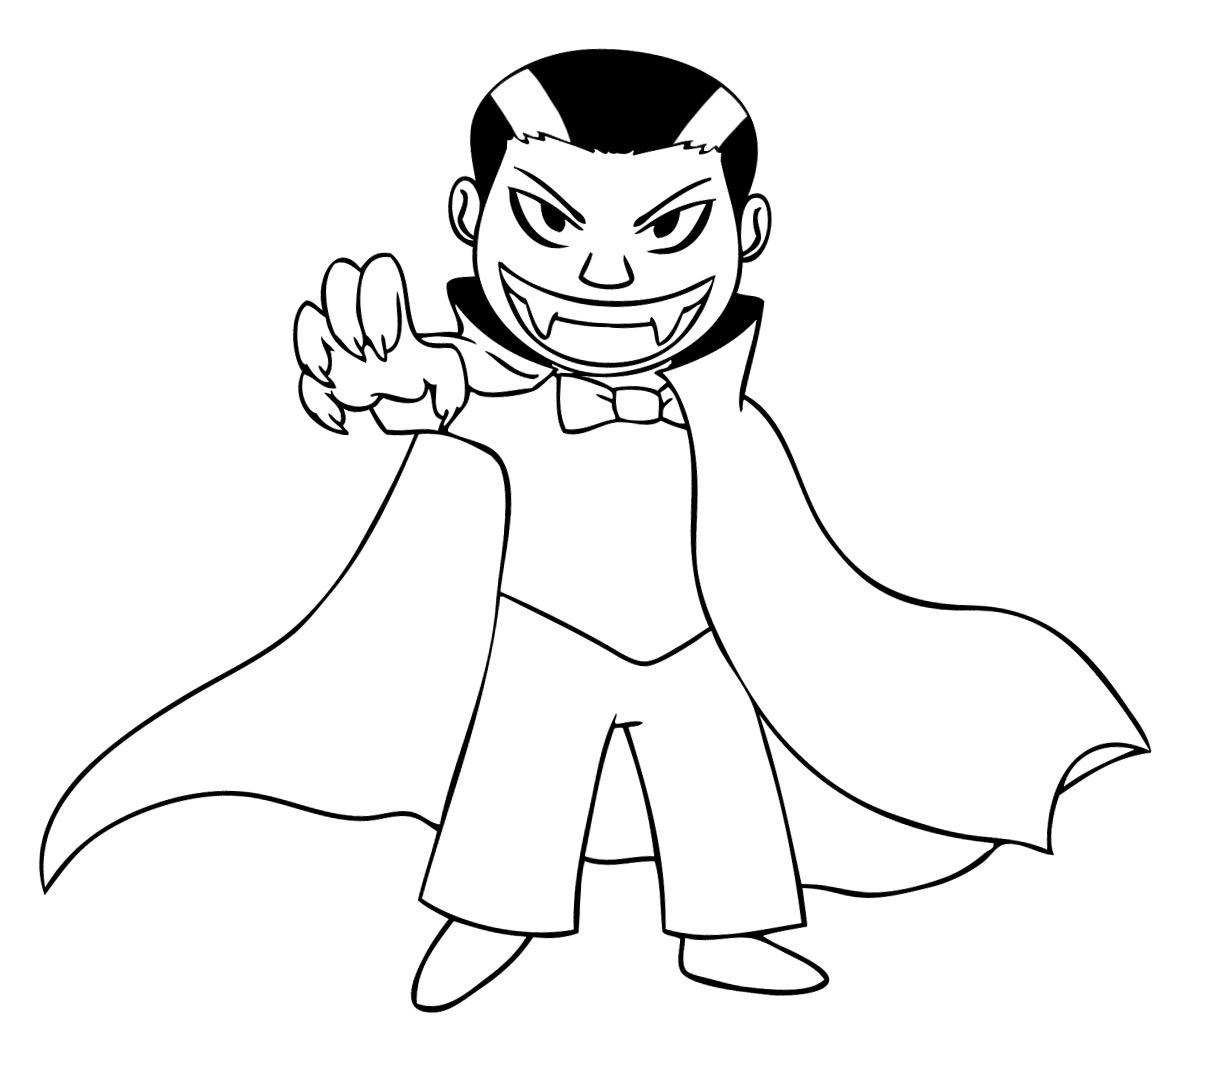 Drawing Vampire 20 Characters – Printable coloring pages